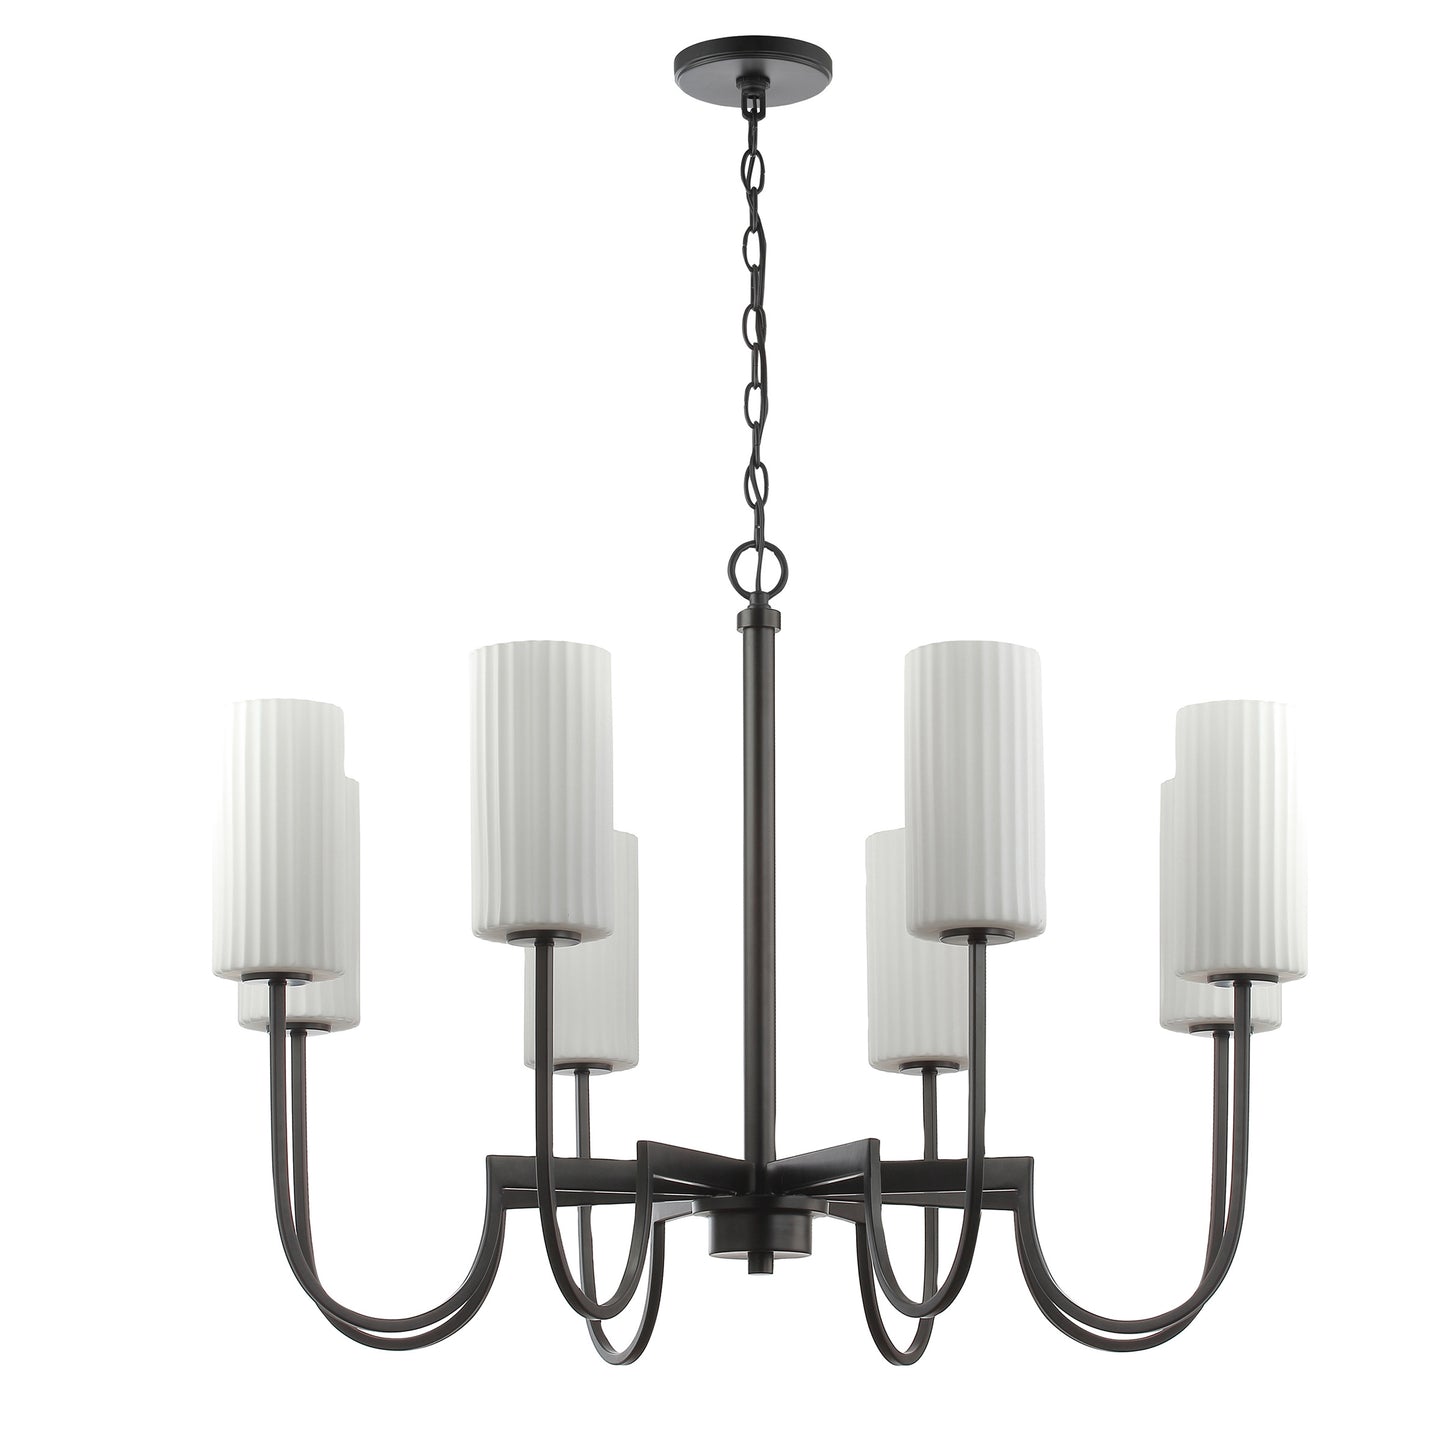 32008SWBK - 8 Light Town and Country 34" Chandelier - Black